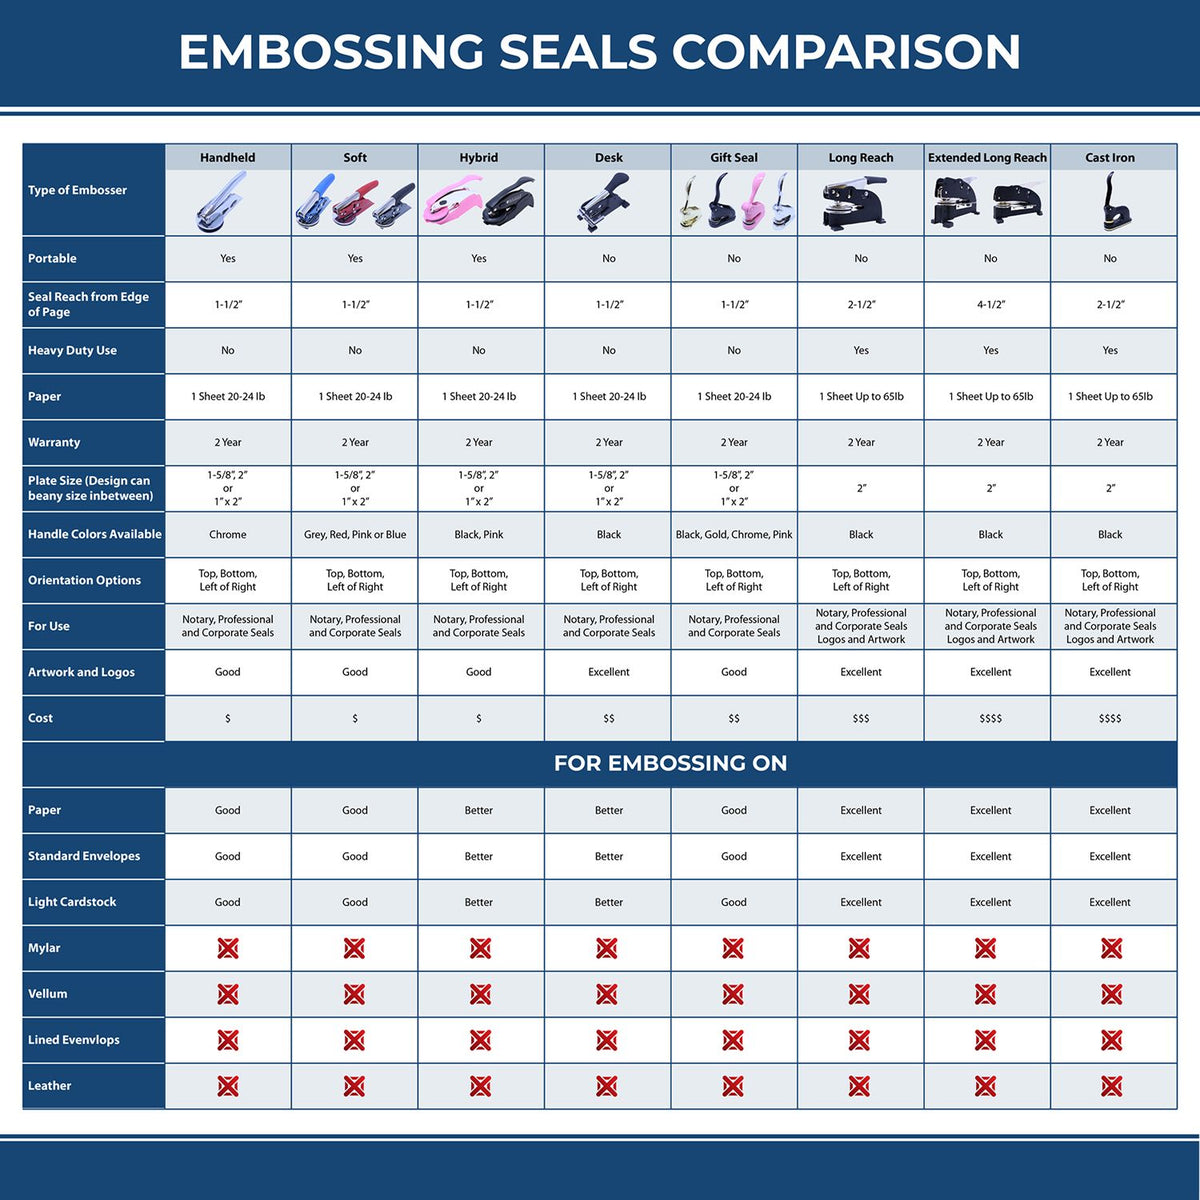 A comparison chart for the different types of mount models available for the Soft Oklahoma Professional Engineer Seal.